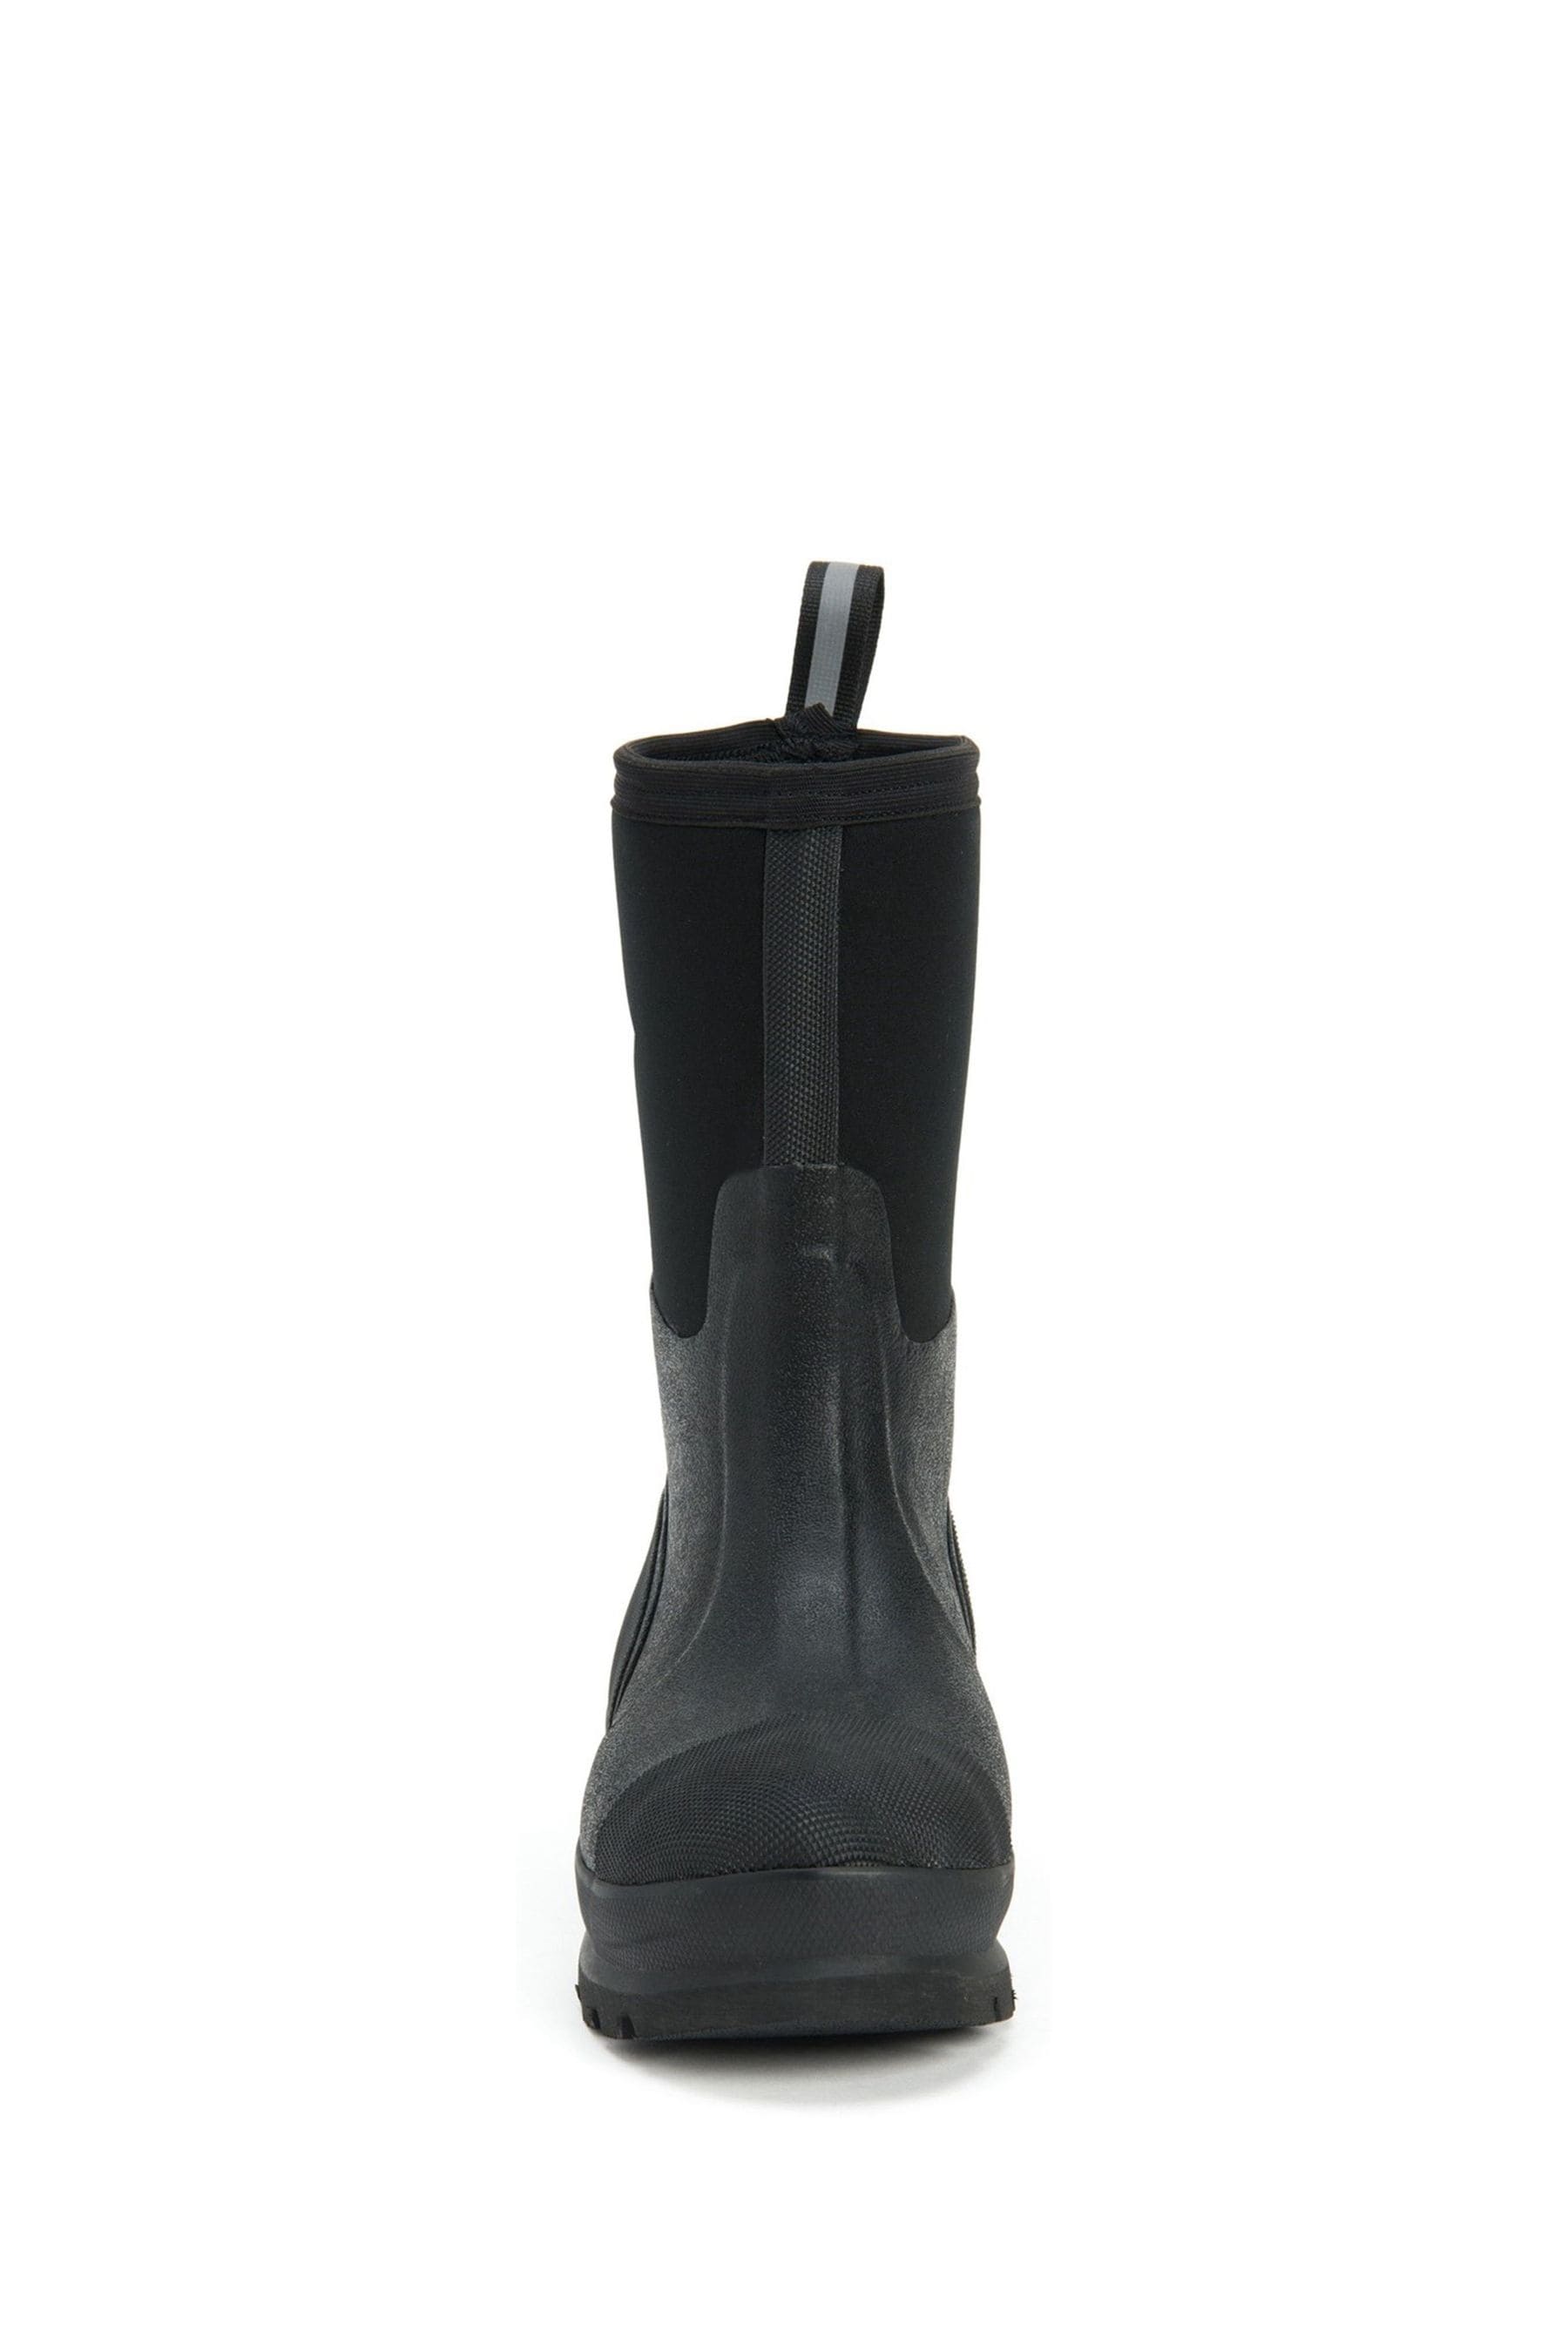 Buy Muck Boots Black Chore Classic Mid Patterned Wellies from the Next ...